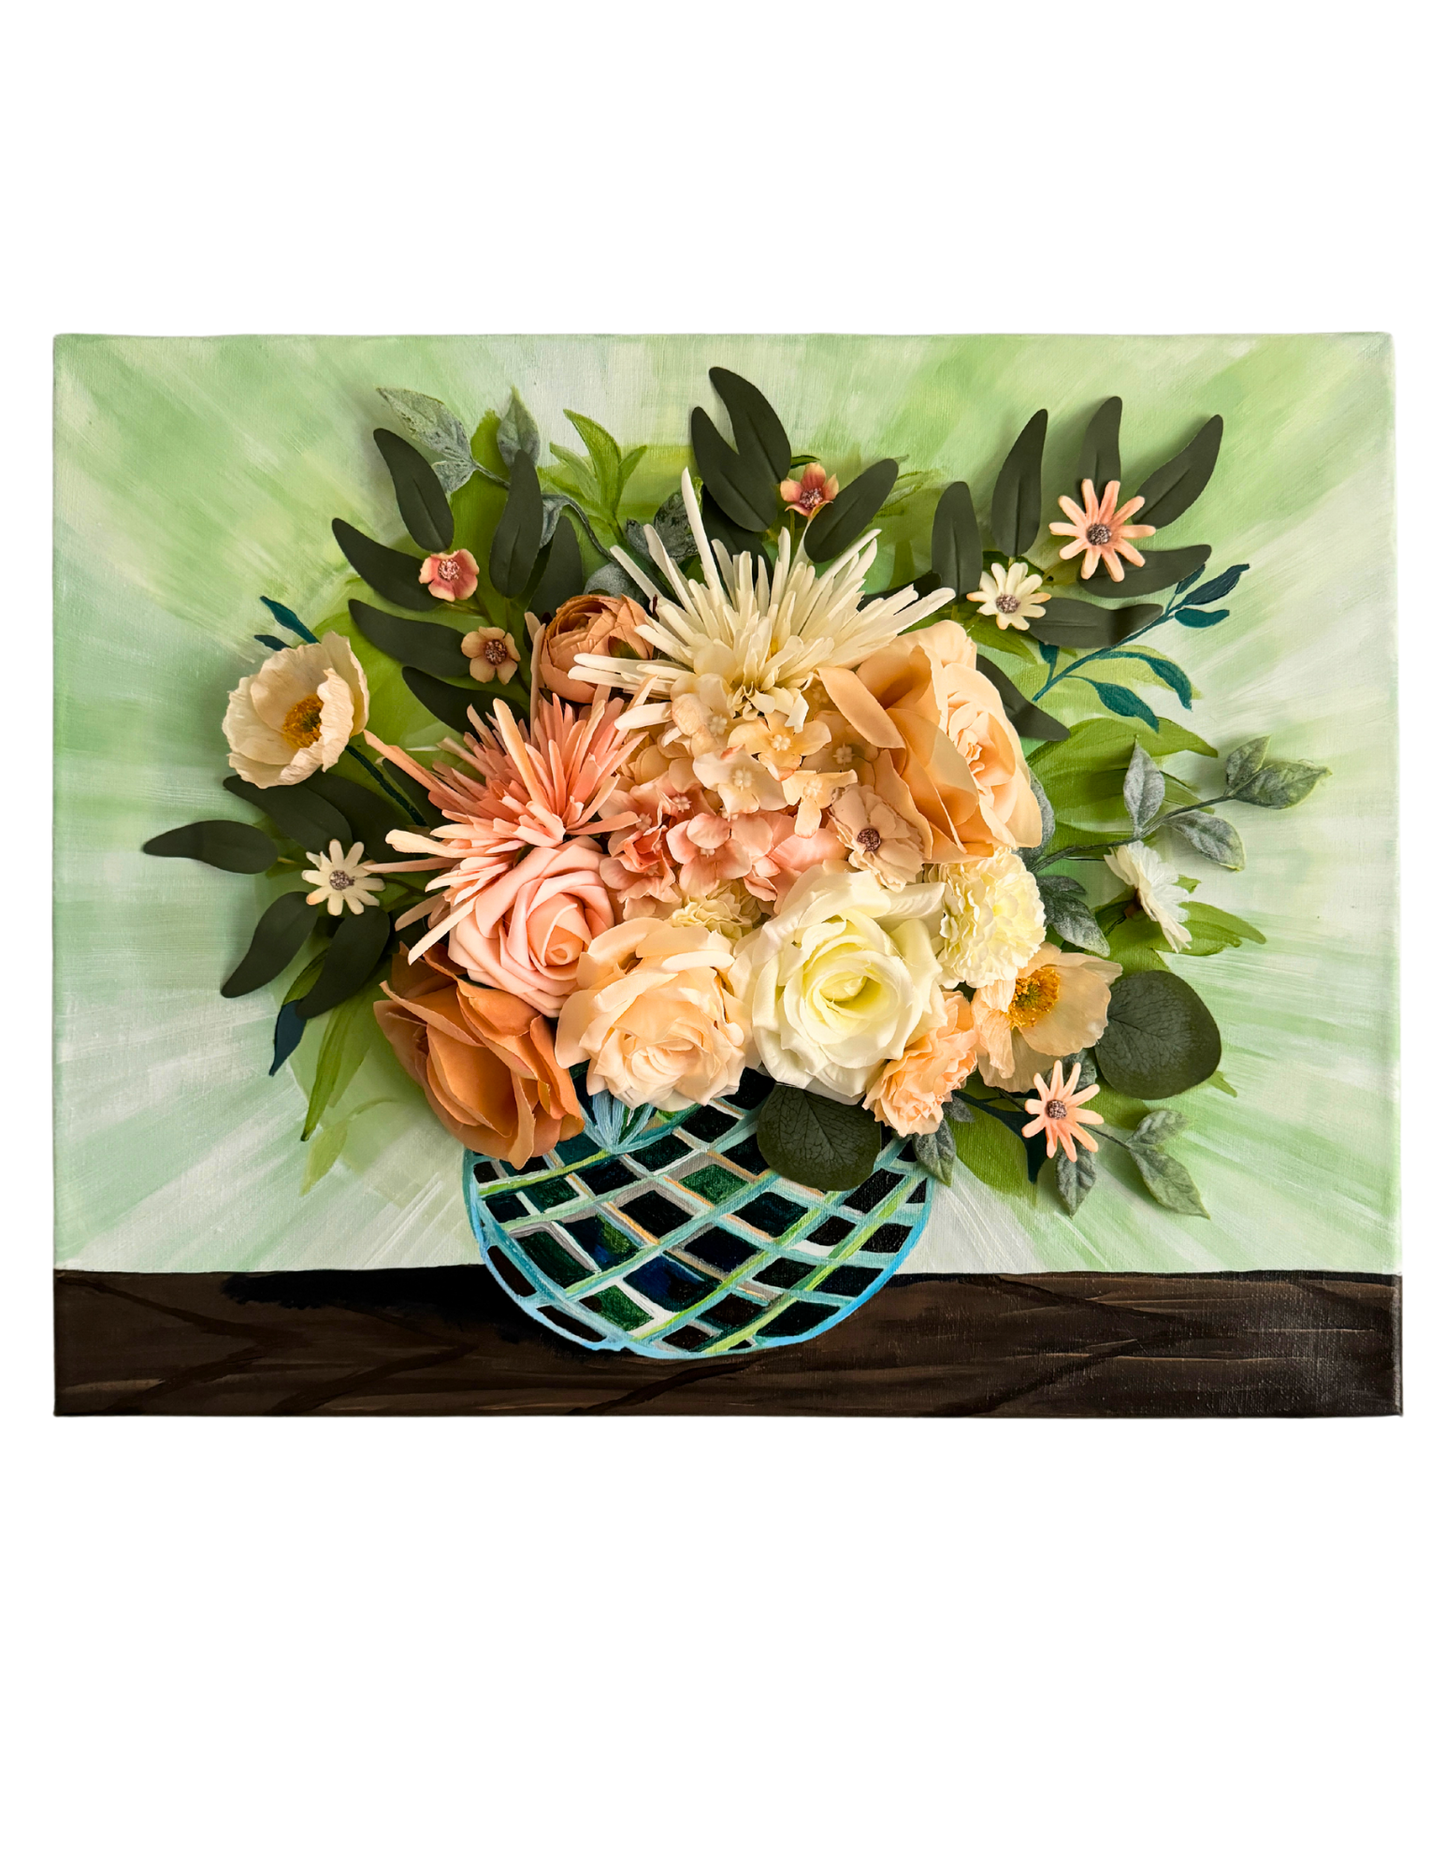 Sierra Serenity Bouquet Art on Canvas 16 x 20 3D Artwork for Your Home or Office